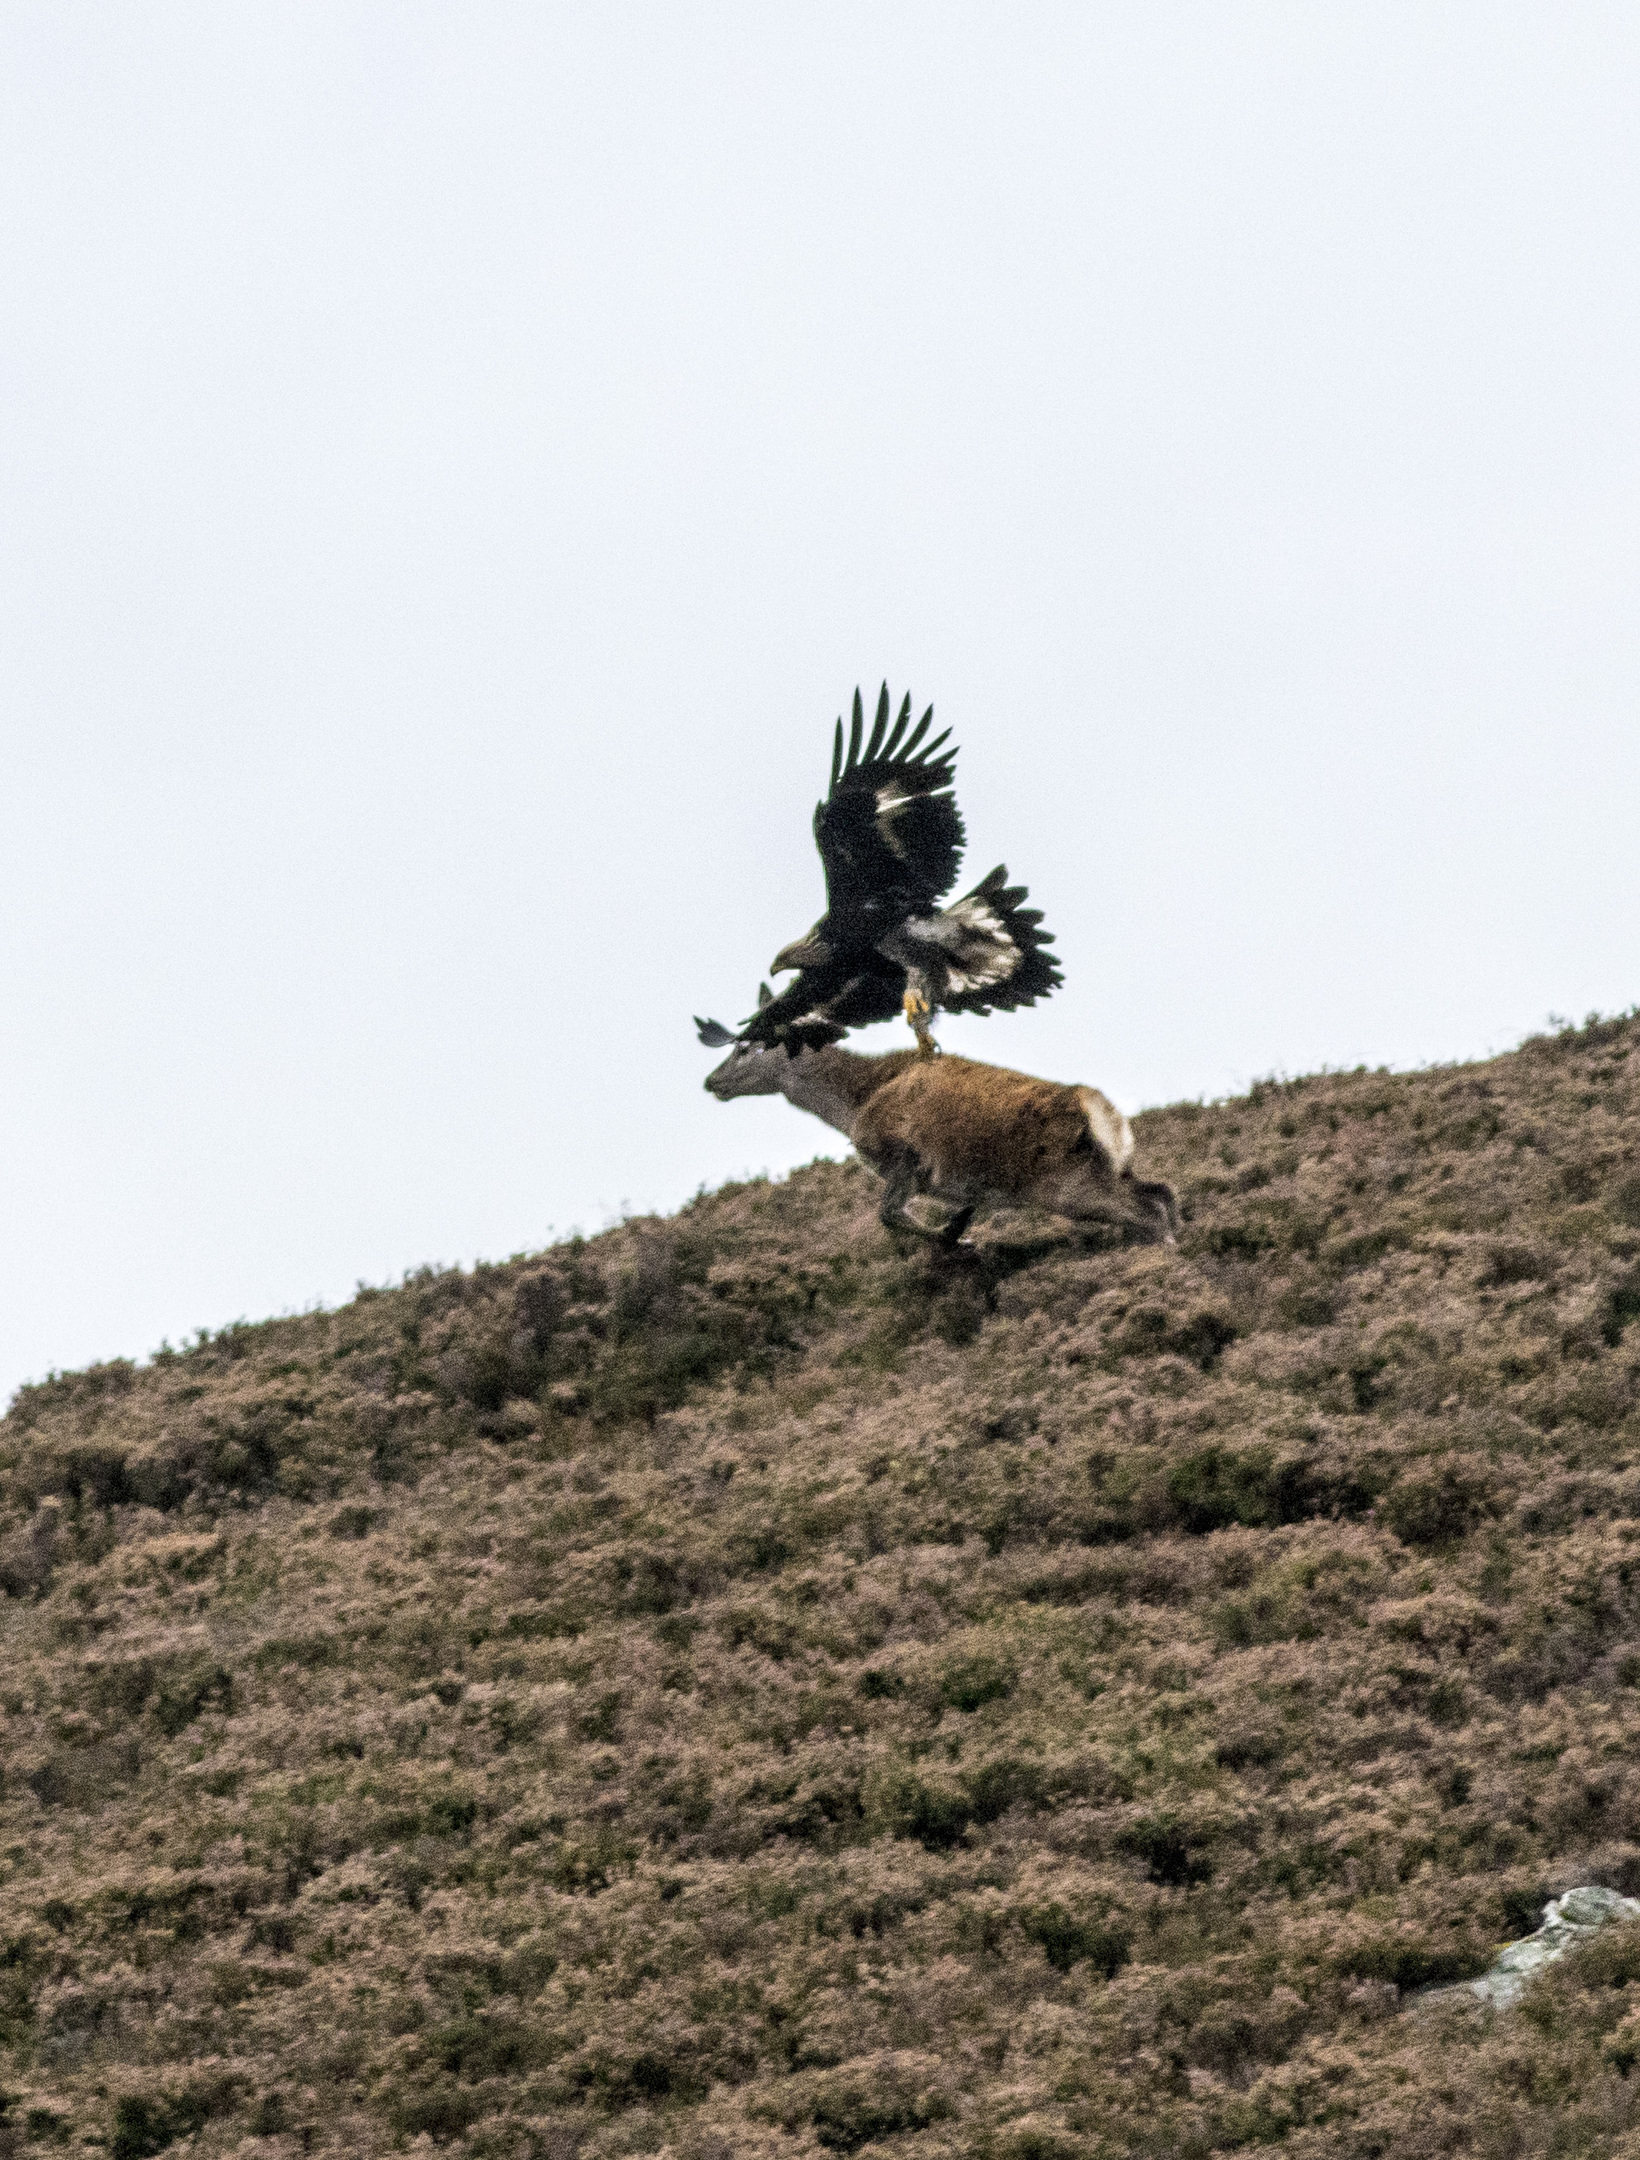 Spectacular Images Capture Moment Golden Eagle Swooped On